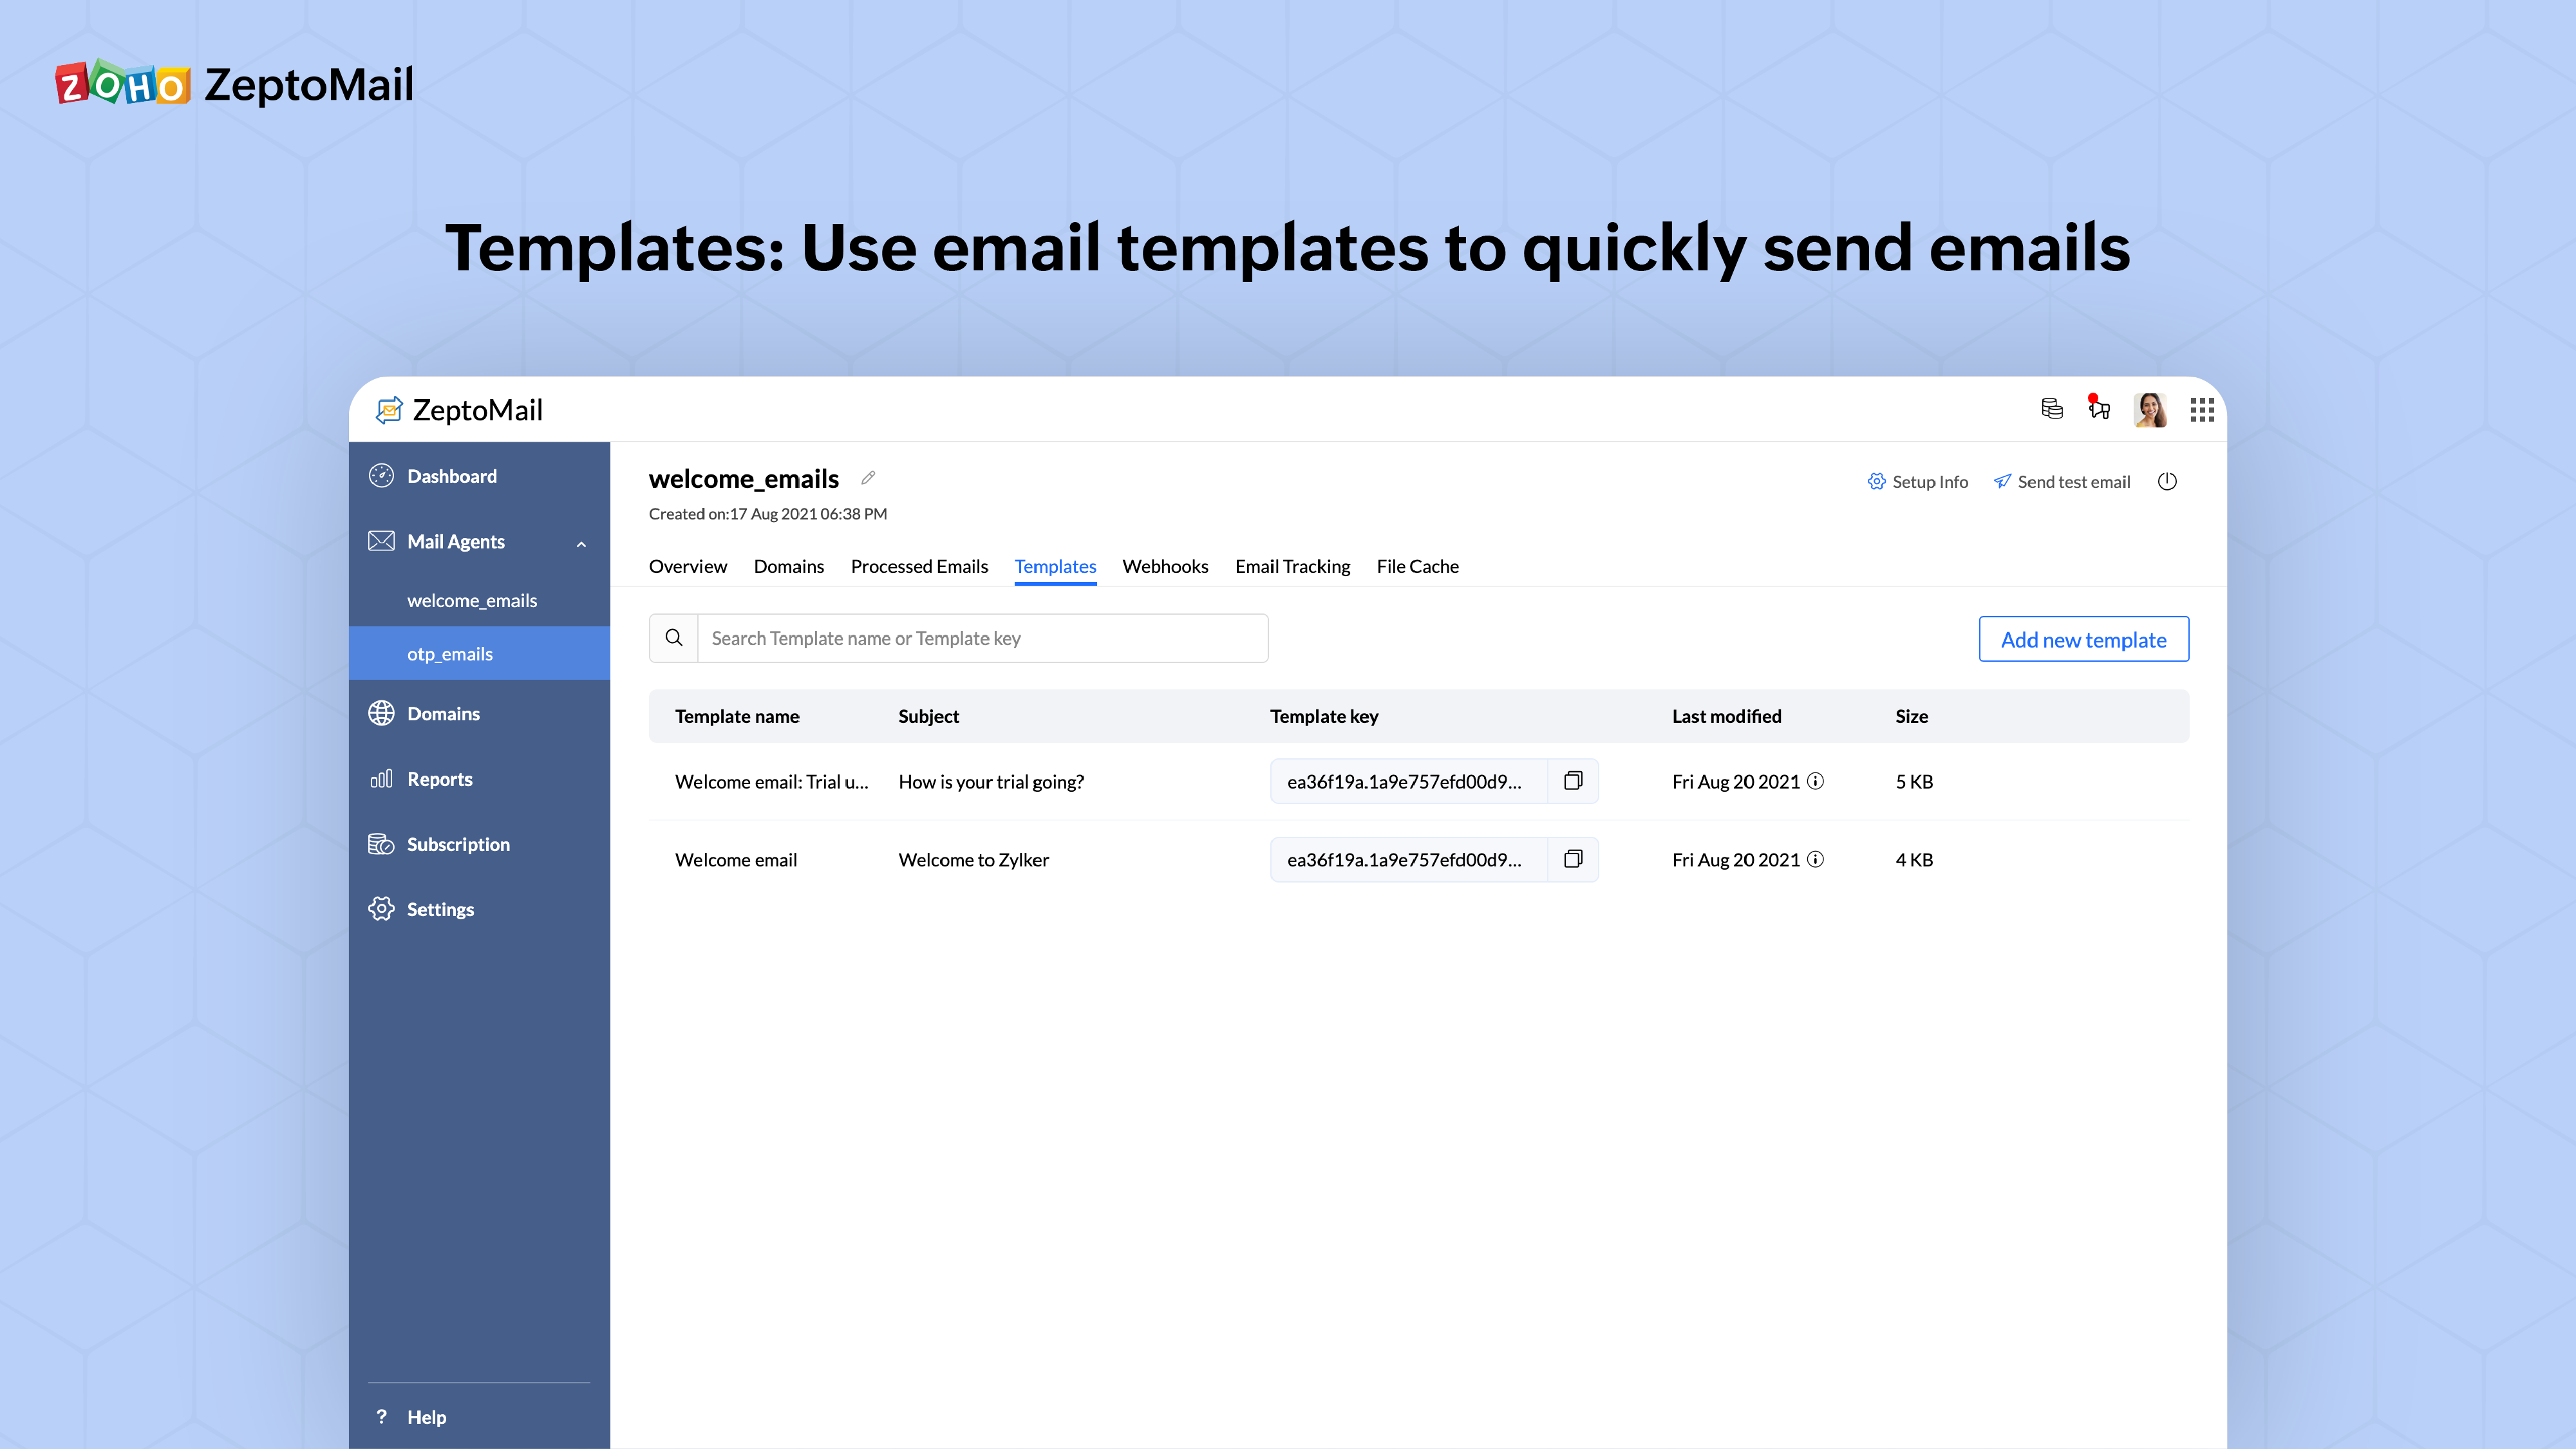 Zeptomail Templates: Use email templates to quickly send emails